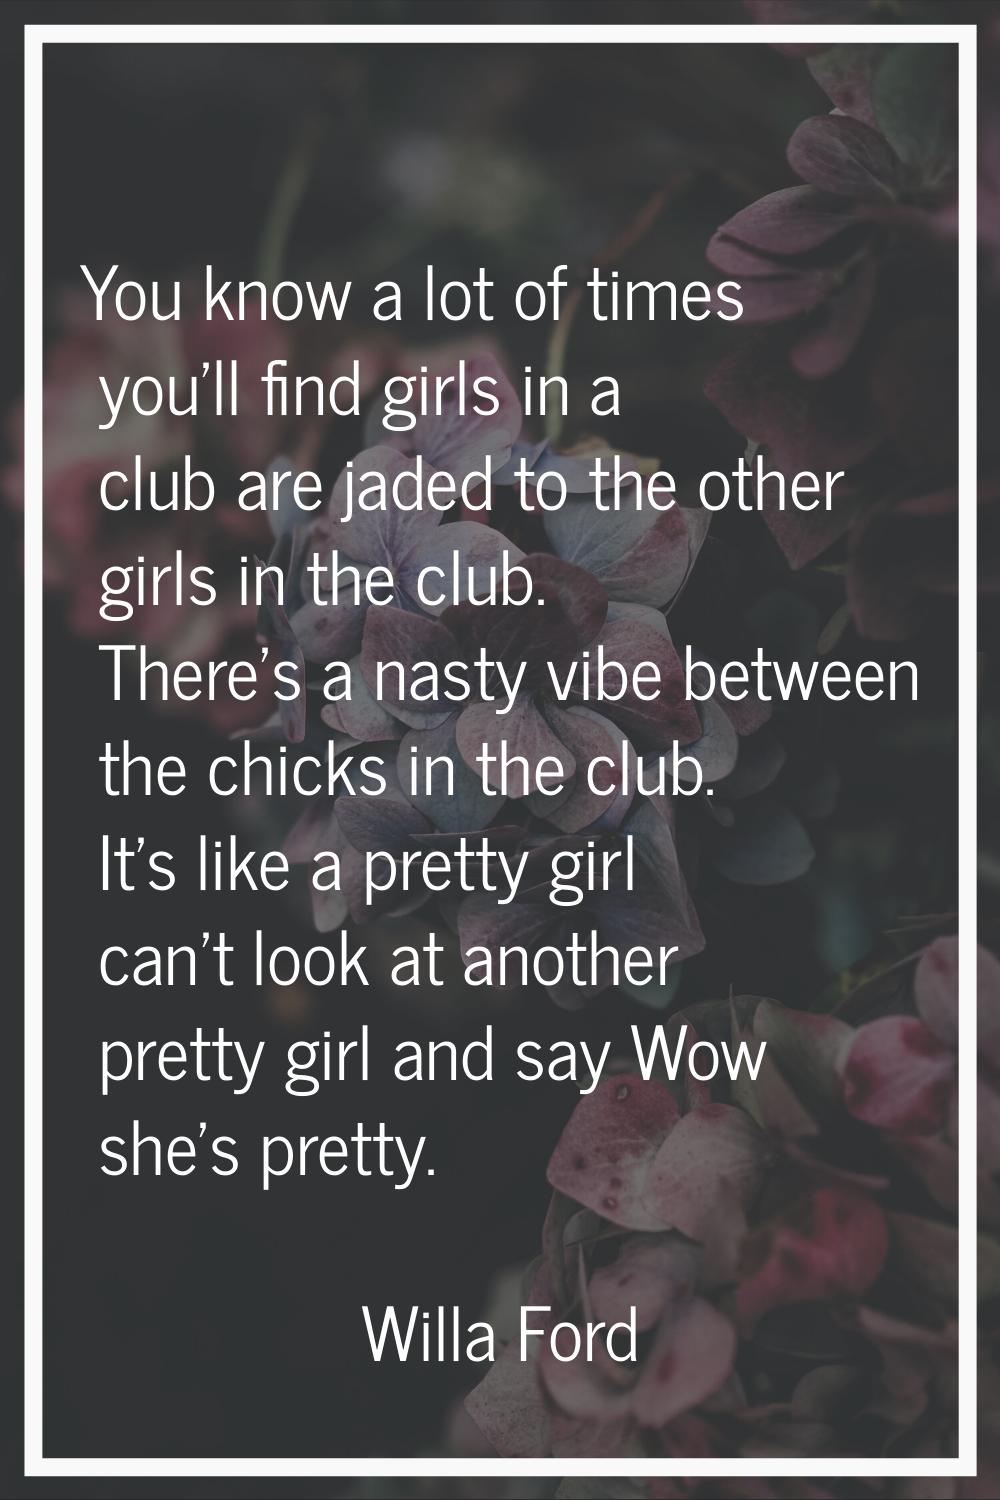 You know a lot of times you'll find girls in a club are jaded to the other girls in the club. There